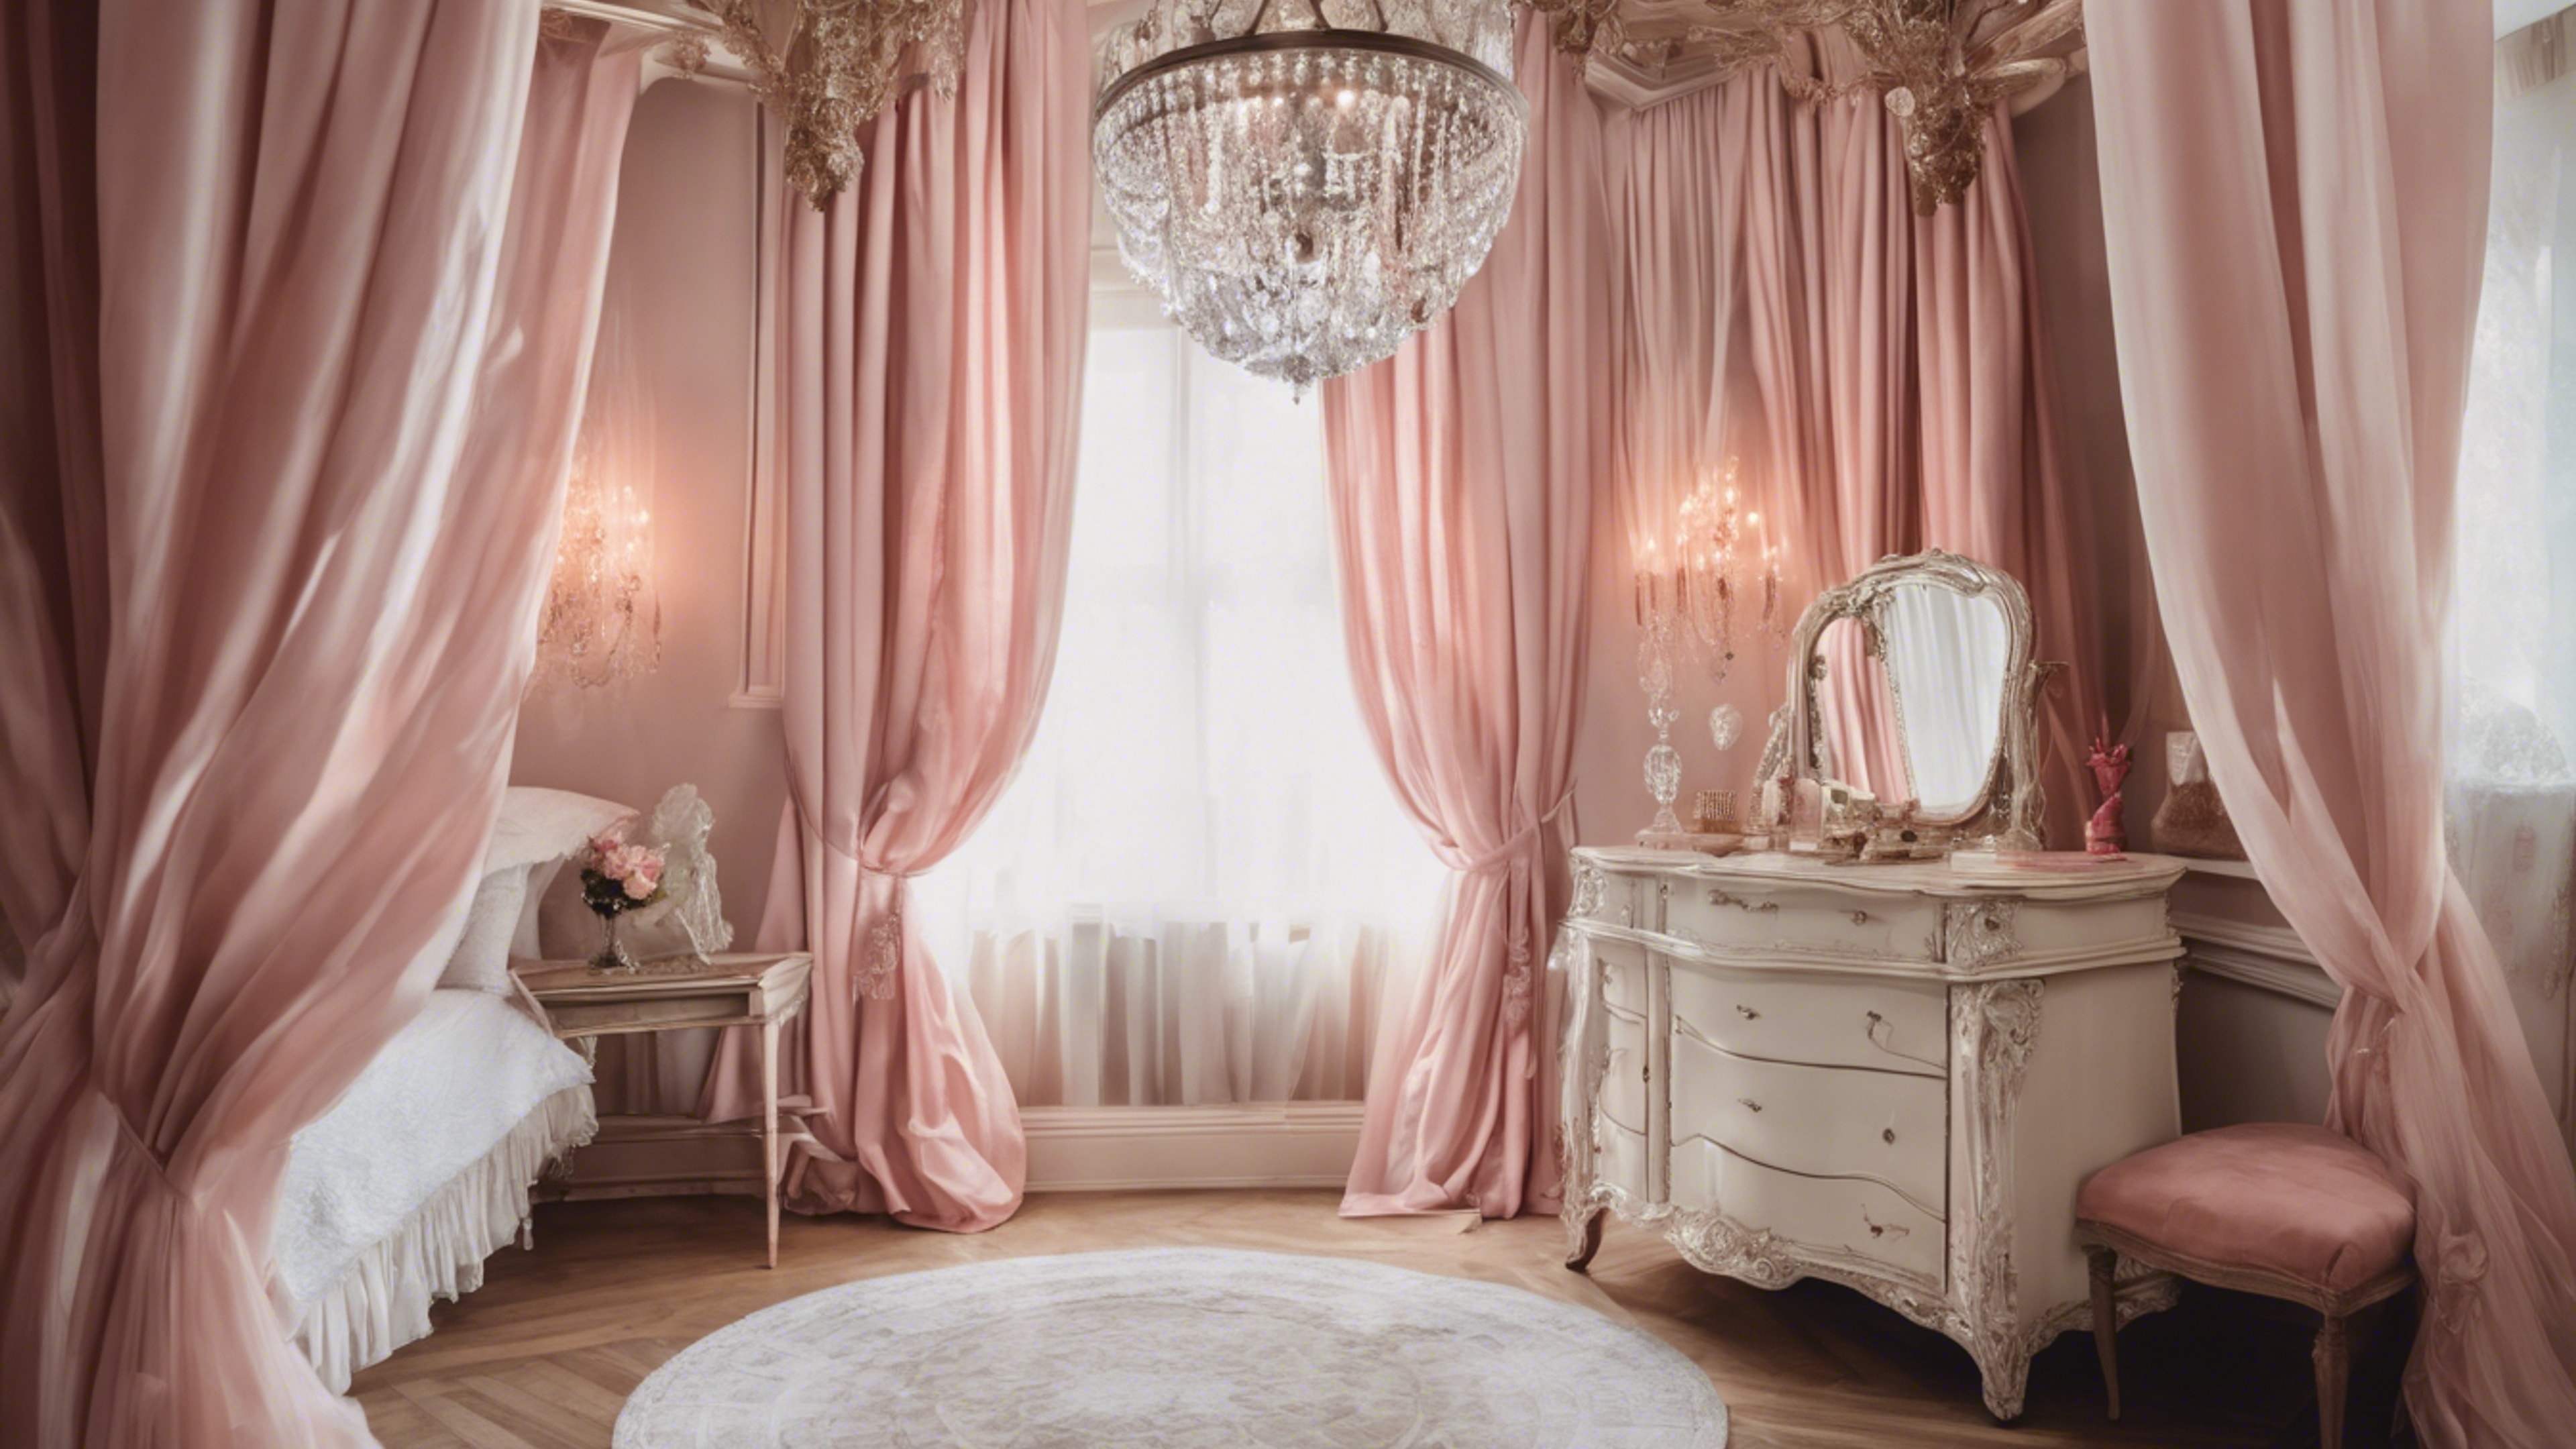 A feminine French bedroom, with canopy bed draped in soft-pink curtains, crystal chandelier hanging overhead, and an elegant antique vanity. Hintergrund[9a96ceac1df24dd59ae9]